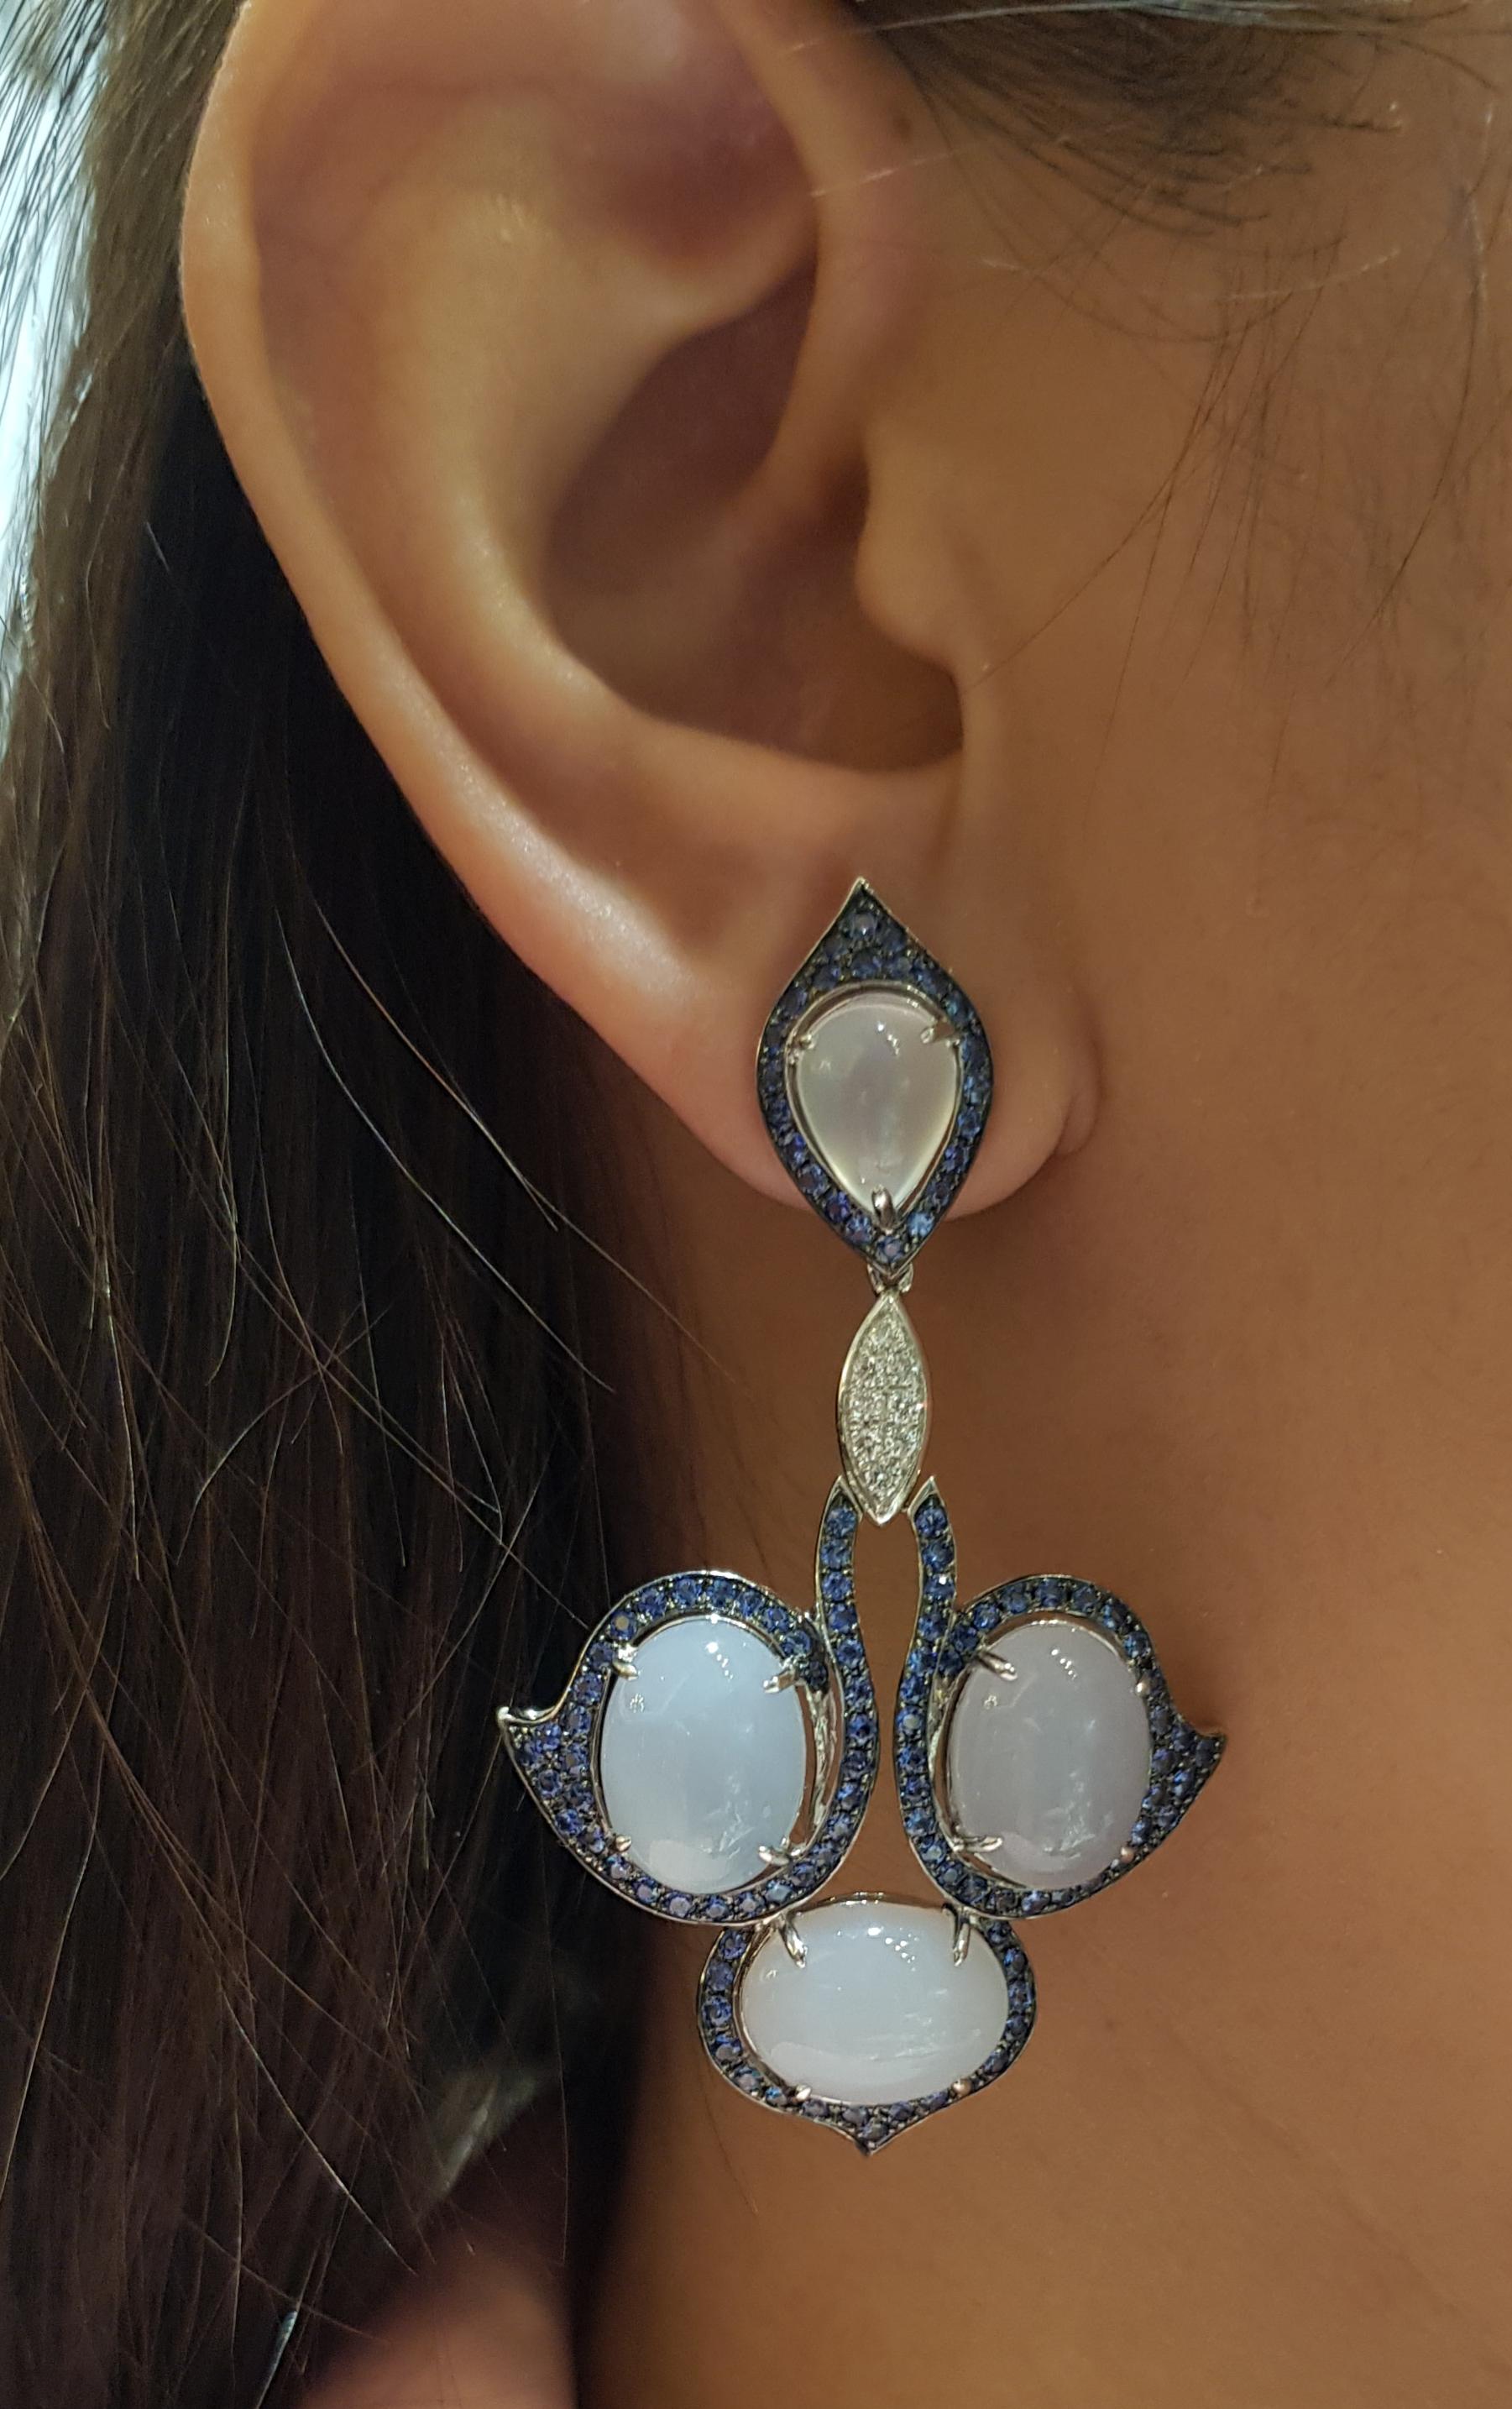 Chalcedony 23.91 carats, Moonstone 3.56 carats, Blue Sapphire 2.71 carats and Diamond 0.19 carat Earrings set in 18 Karat White Gold Settings

Width:  3.5 cm 
Length:  6.0 cm
Total Weight: 26.31 grams

